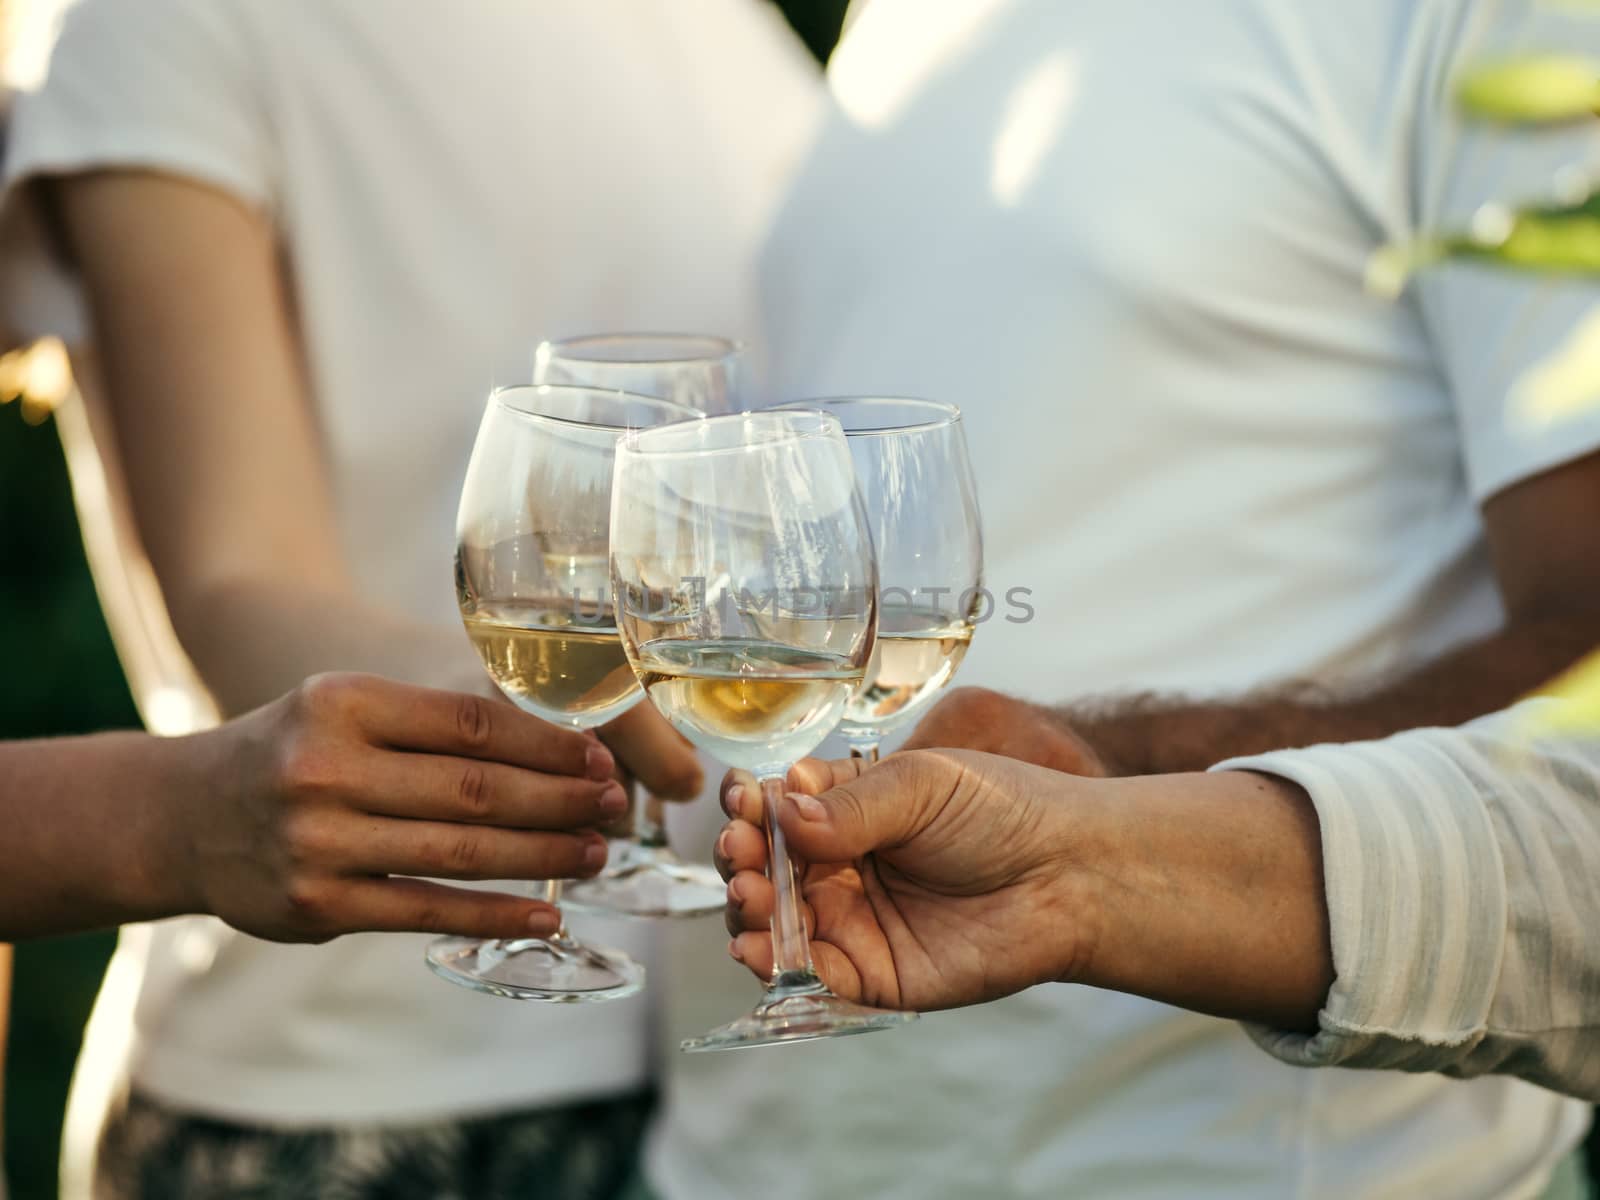 White wine glasses in hands. Four unrecognizable people clang glasses together outdoors.